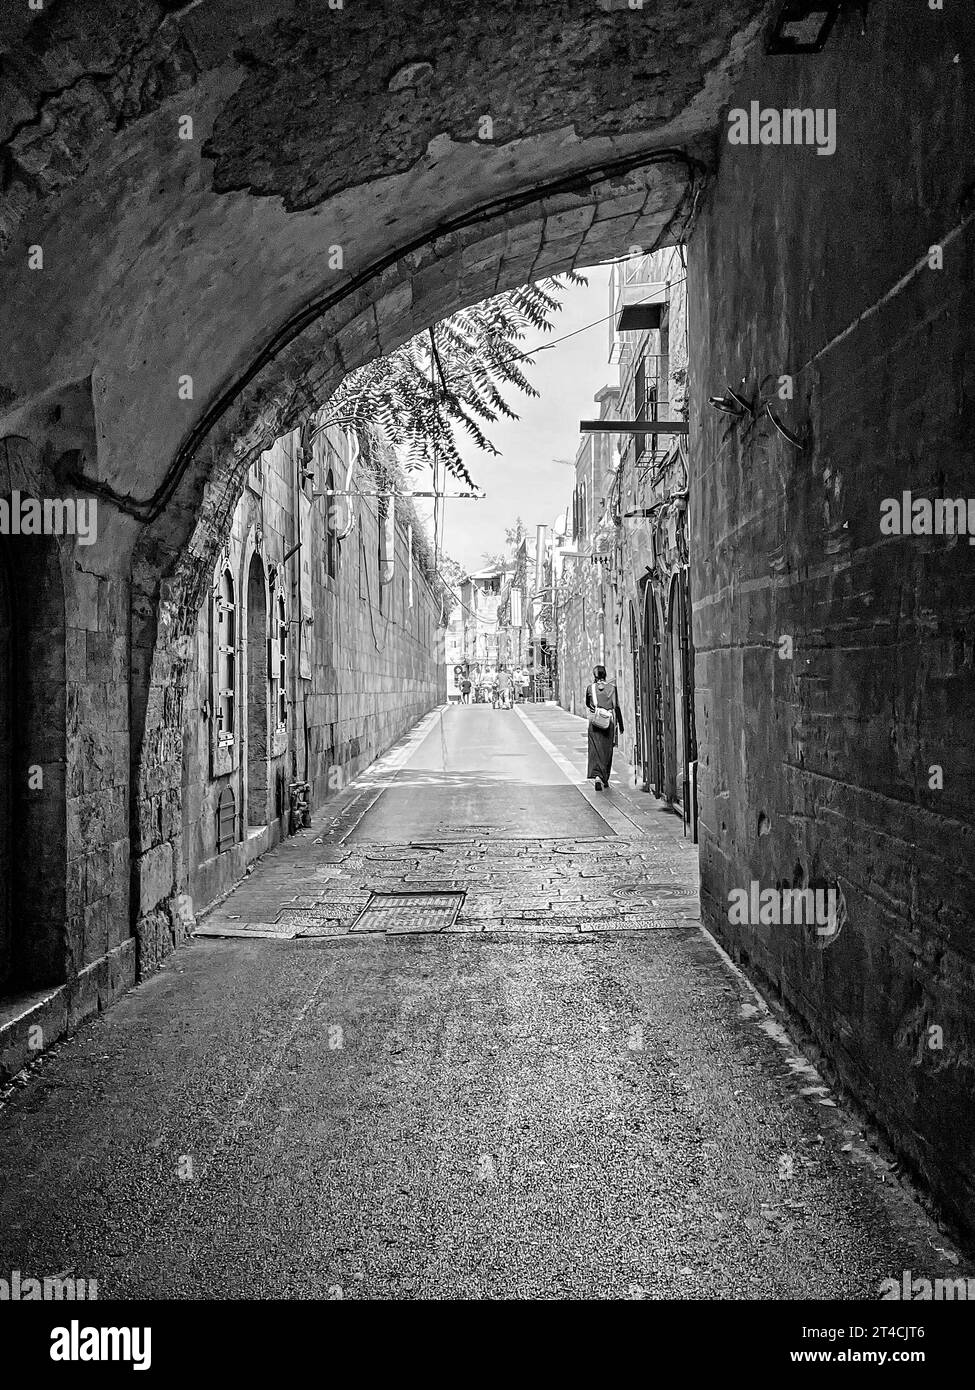 Jerusalem, Israel - October 23, 2023: Urban view from the old city of Jerusalem streets on October 23, during the war between Hamas and Israel which s Stock Photo